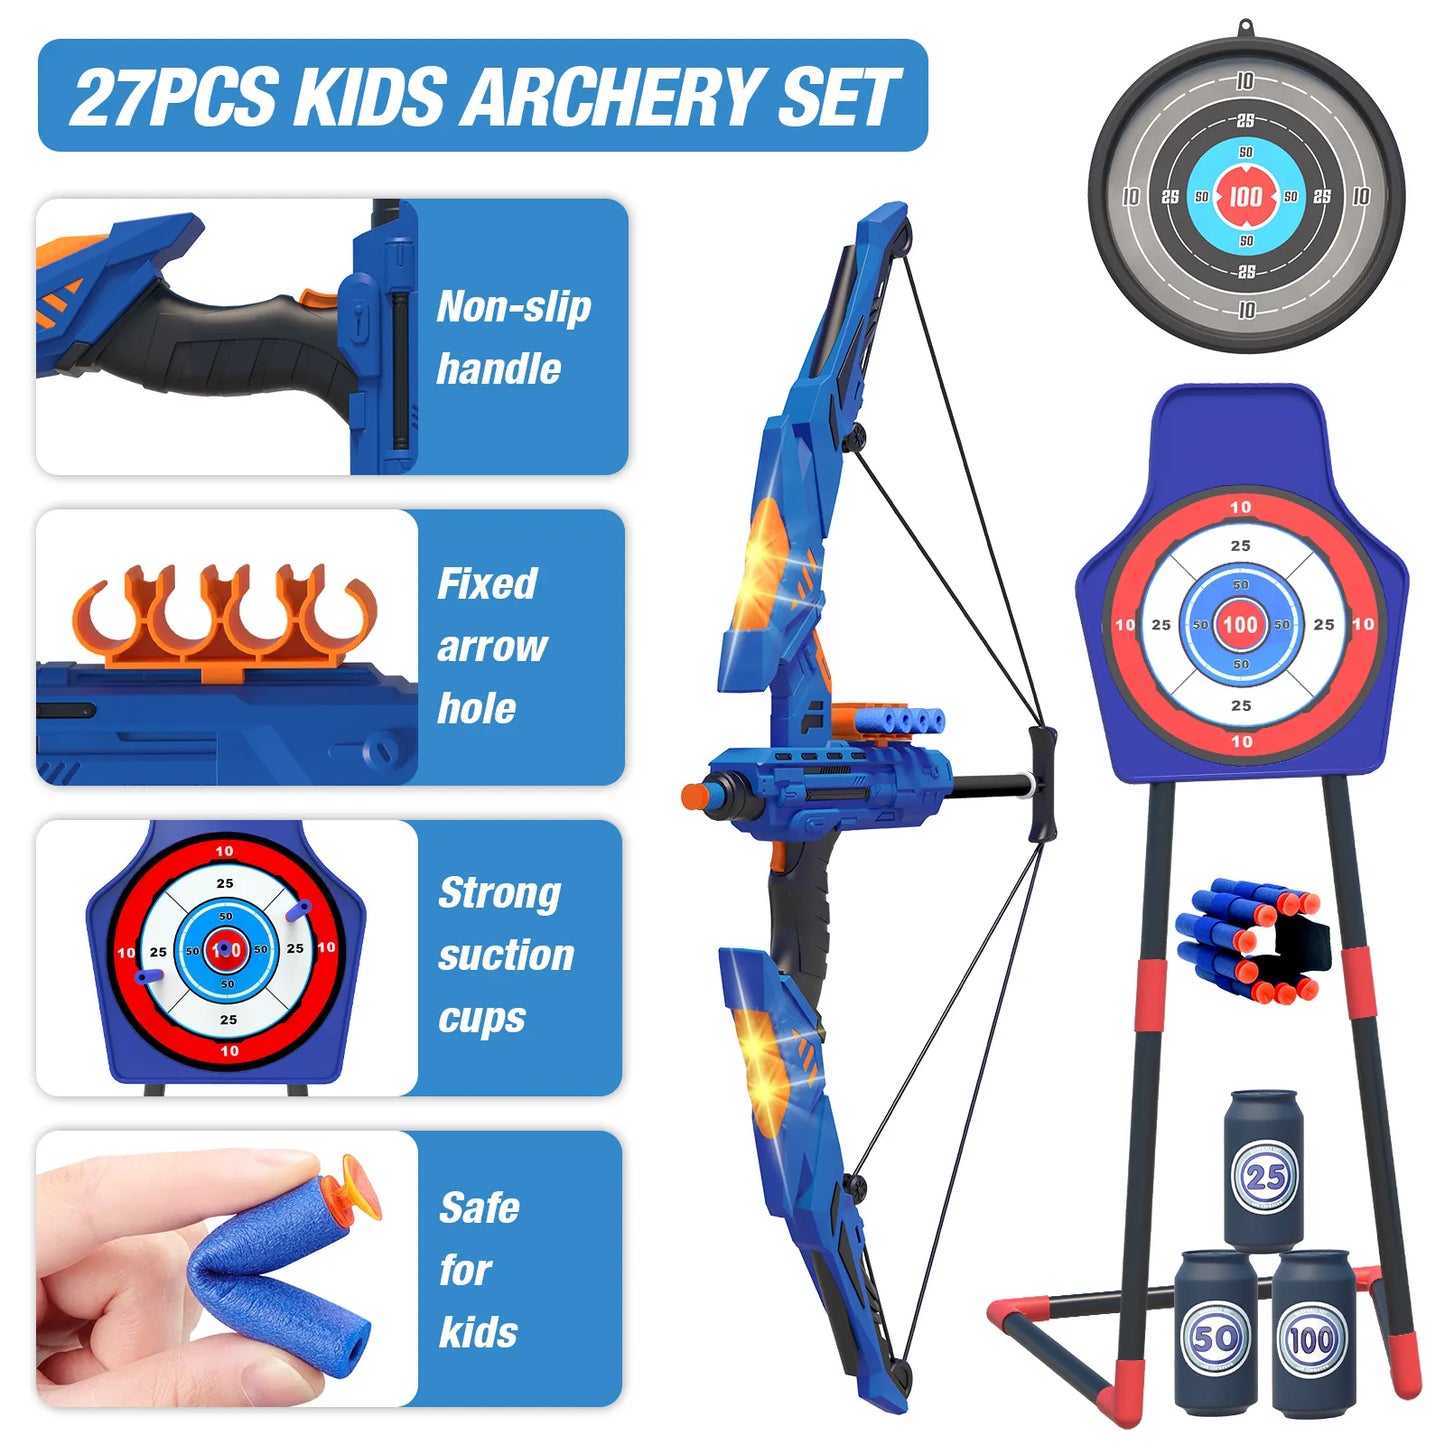 Kids Bow and Arrow Light-up Archery Set Toys Gifts for 3-12 Years Old kids